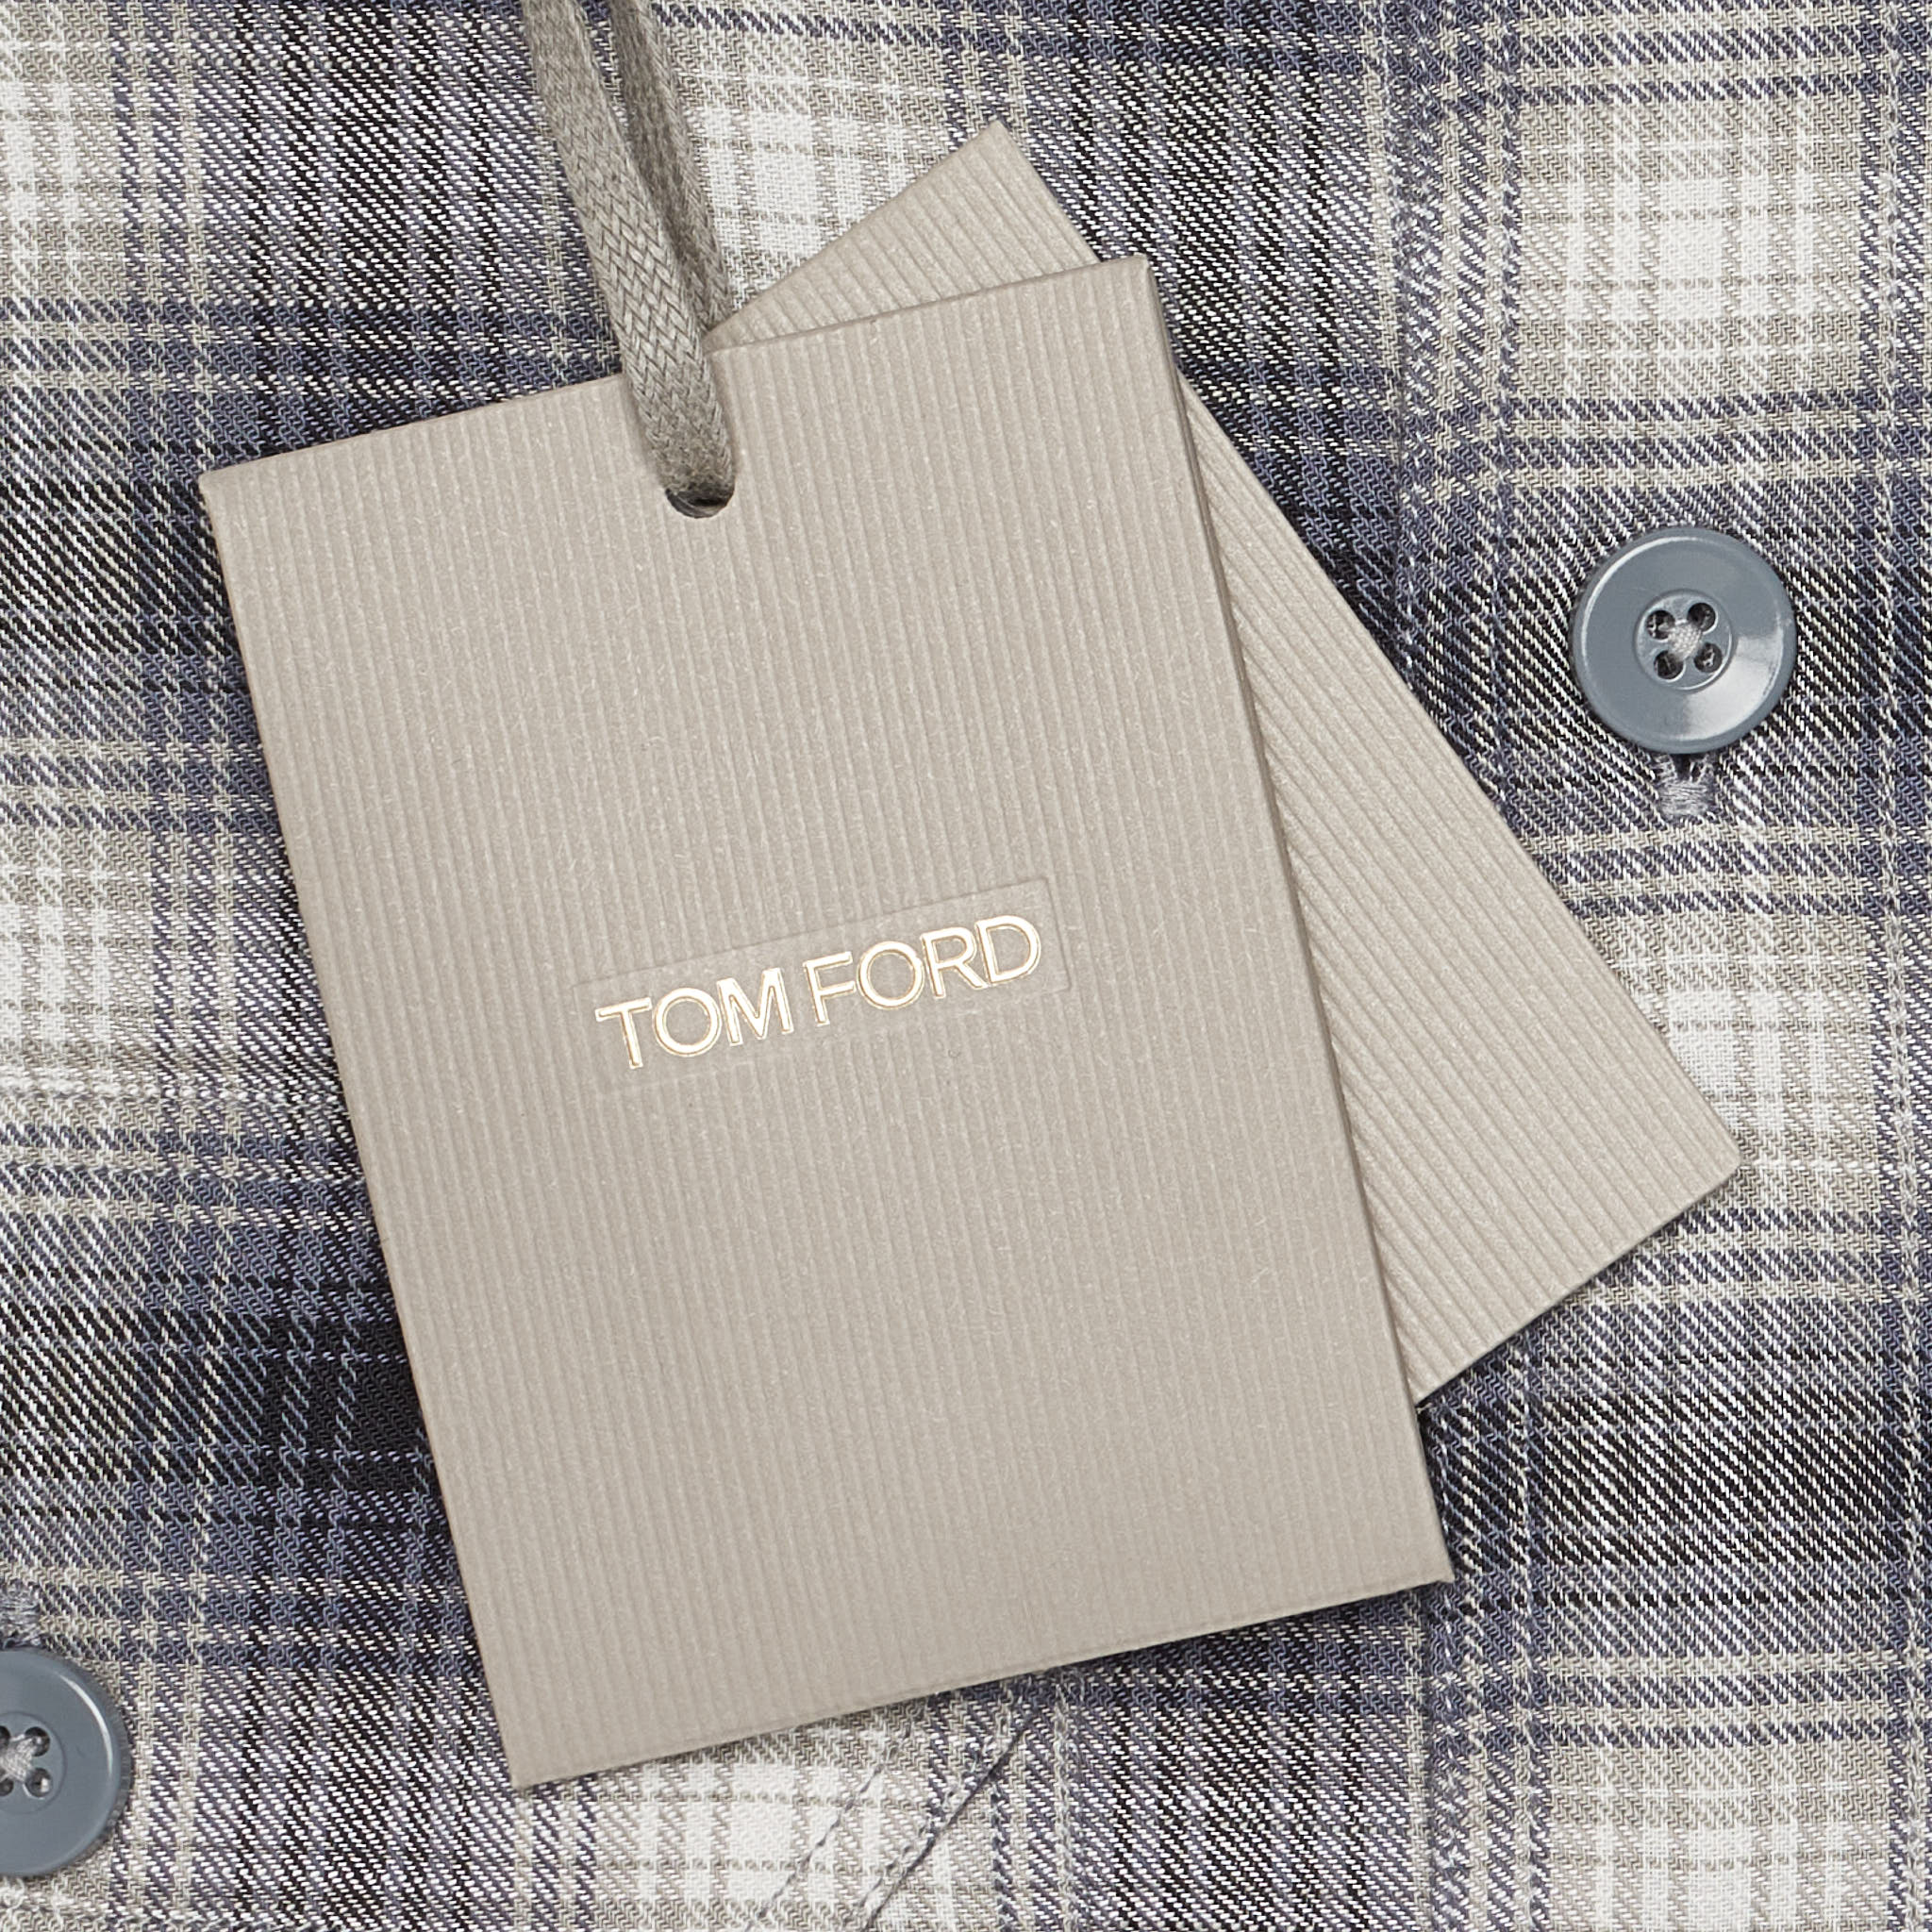 TOM FORD Gray Plaid Cotton Button-Down Military Casual Shirt NEW Slim Fit TOM FORD